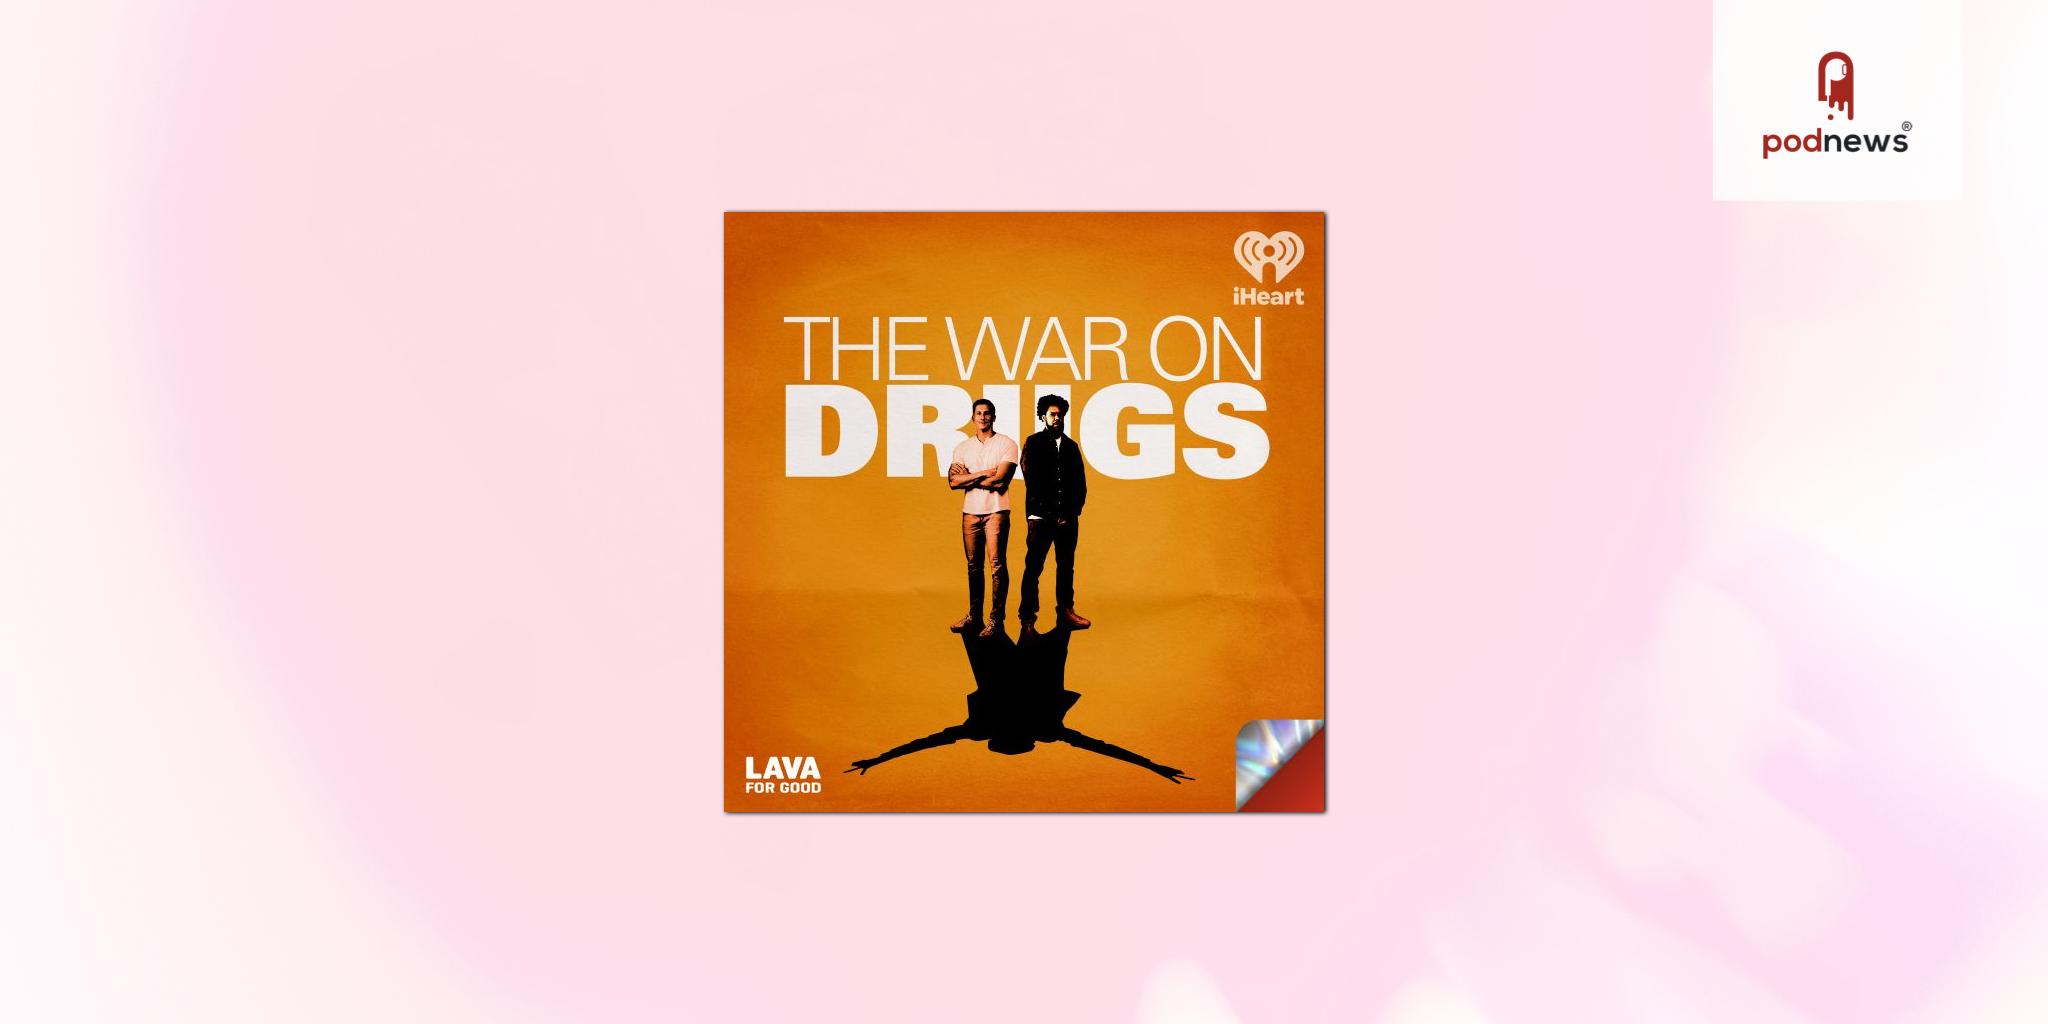 Lava for Good Podcasts Launches ‘The War on Drugs’